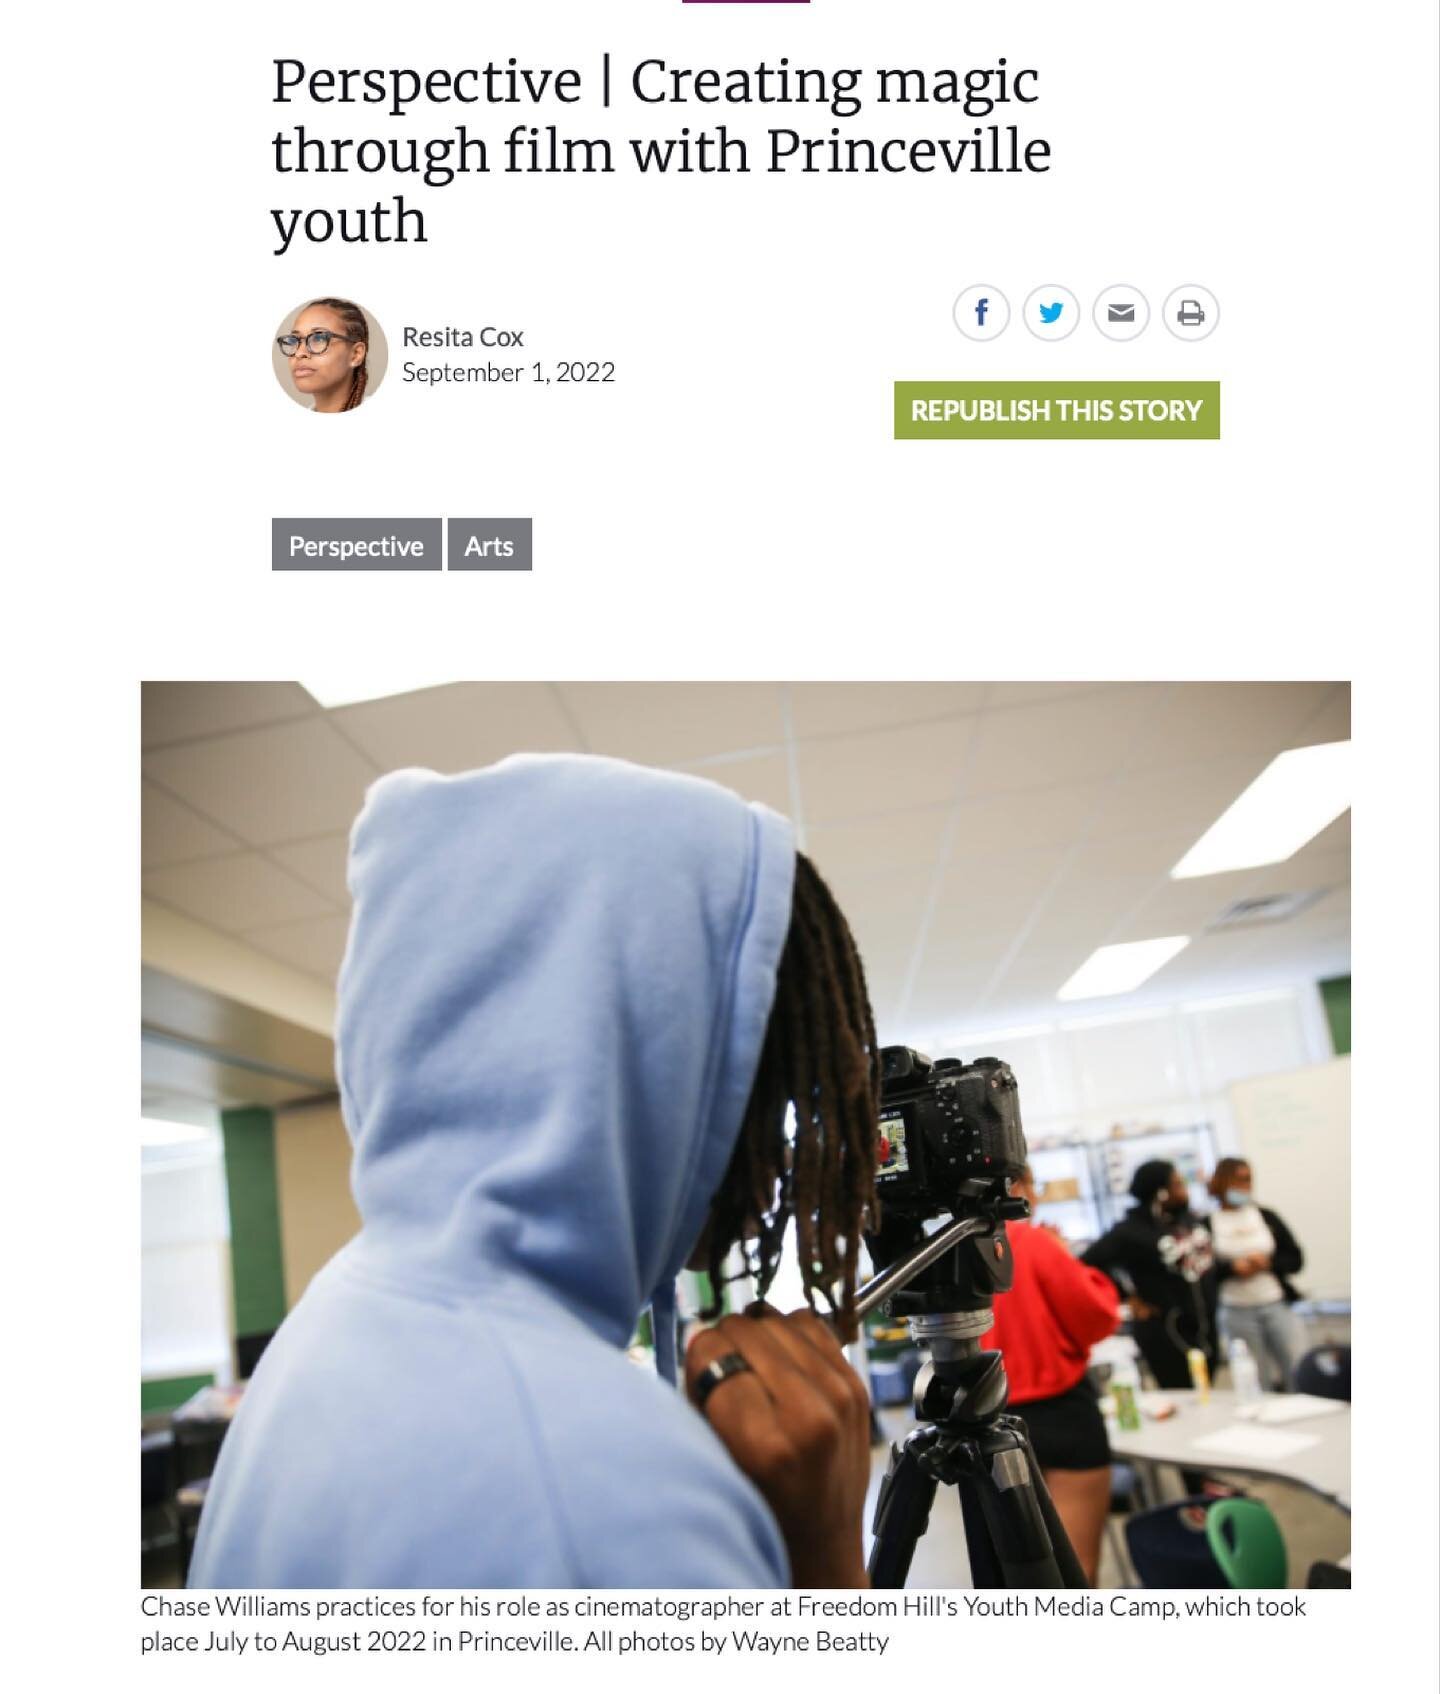 &ldquo;I&rsquo;m not an educator in the traditional sense, instead, I am a documentary filmmaker from Kinston who understands the importance of leaving a path for younger generations to follow.&rdquo; &ndash; Resita Cox

This summer, @FreedomHillDoc 